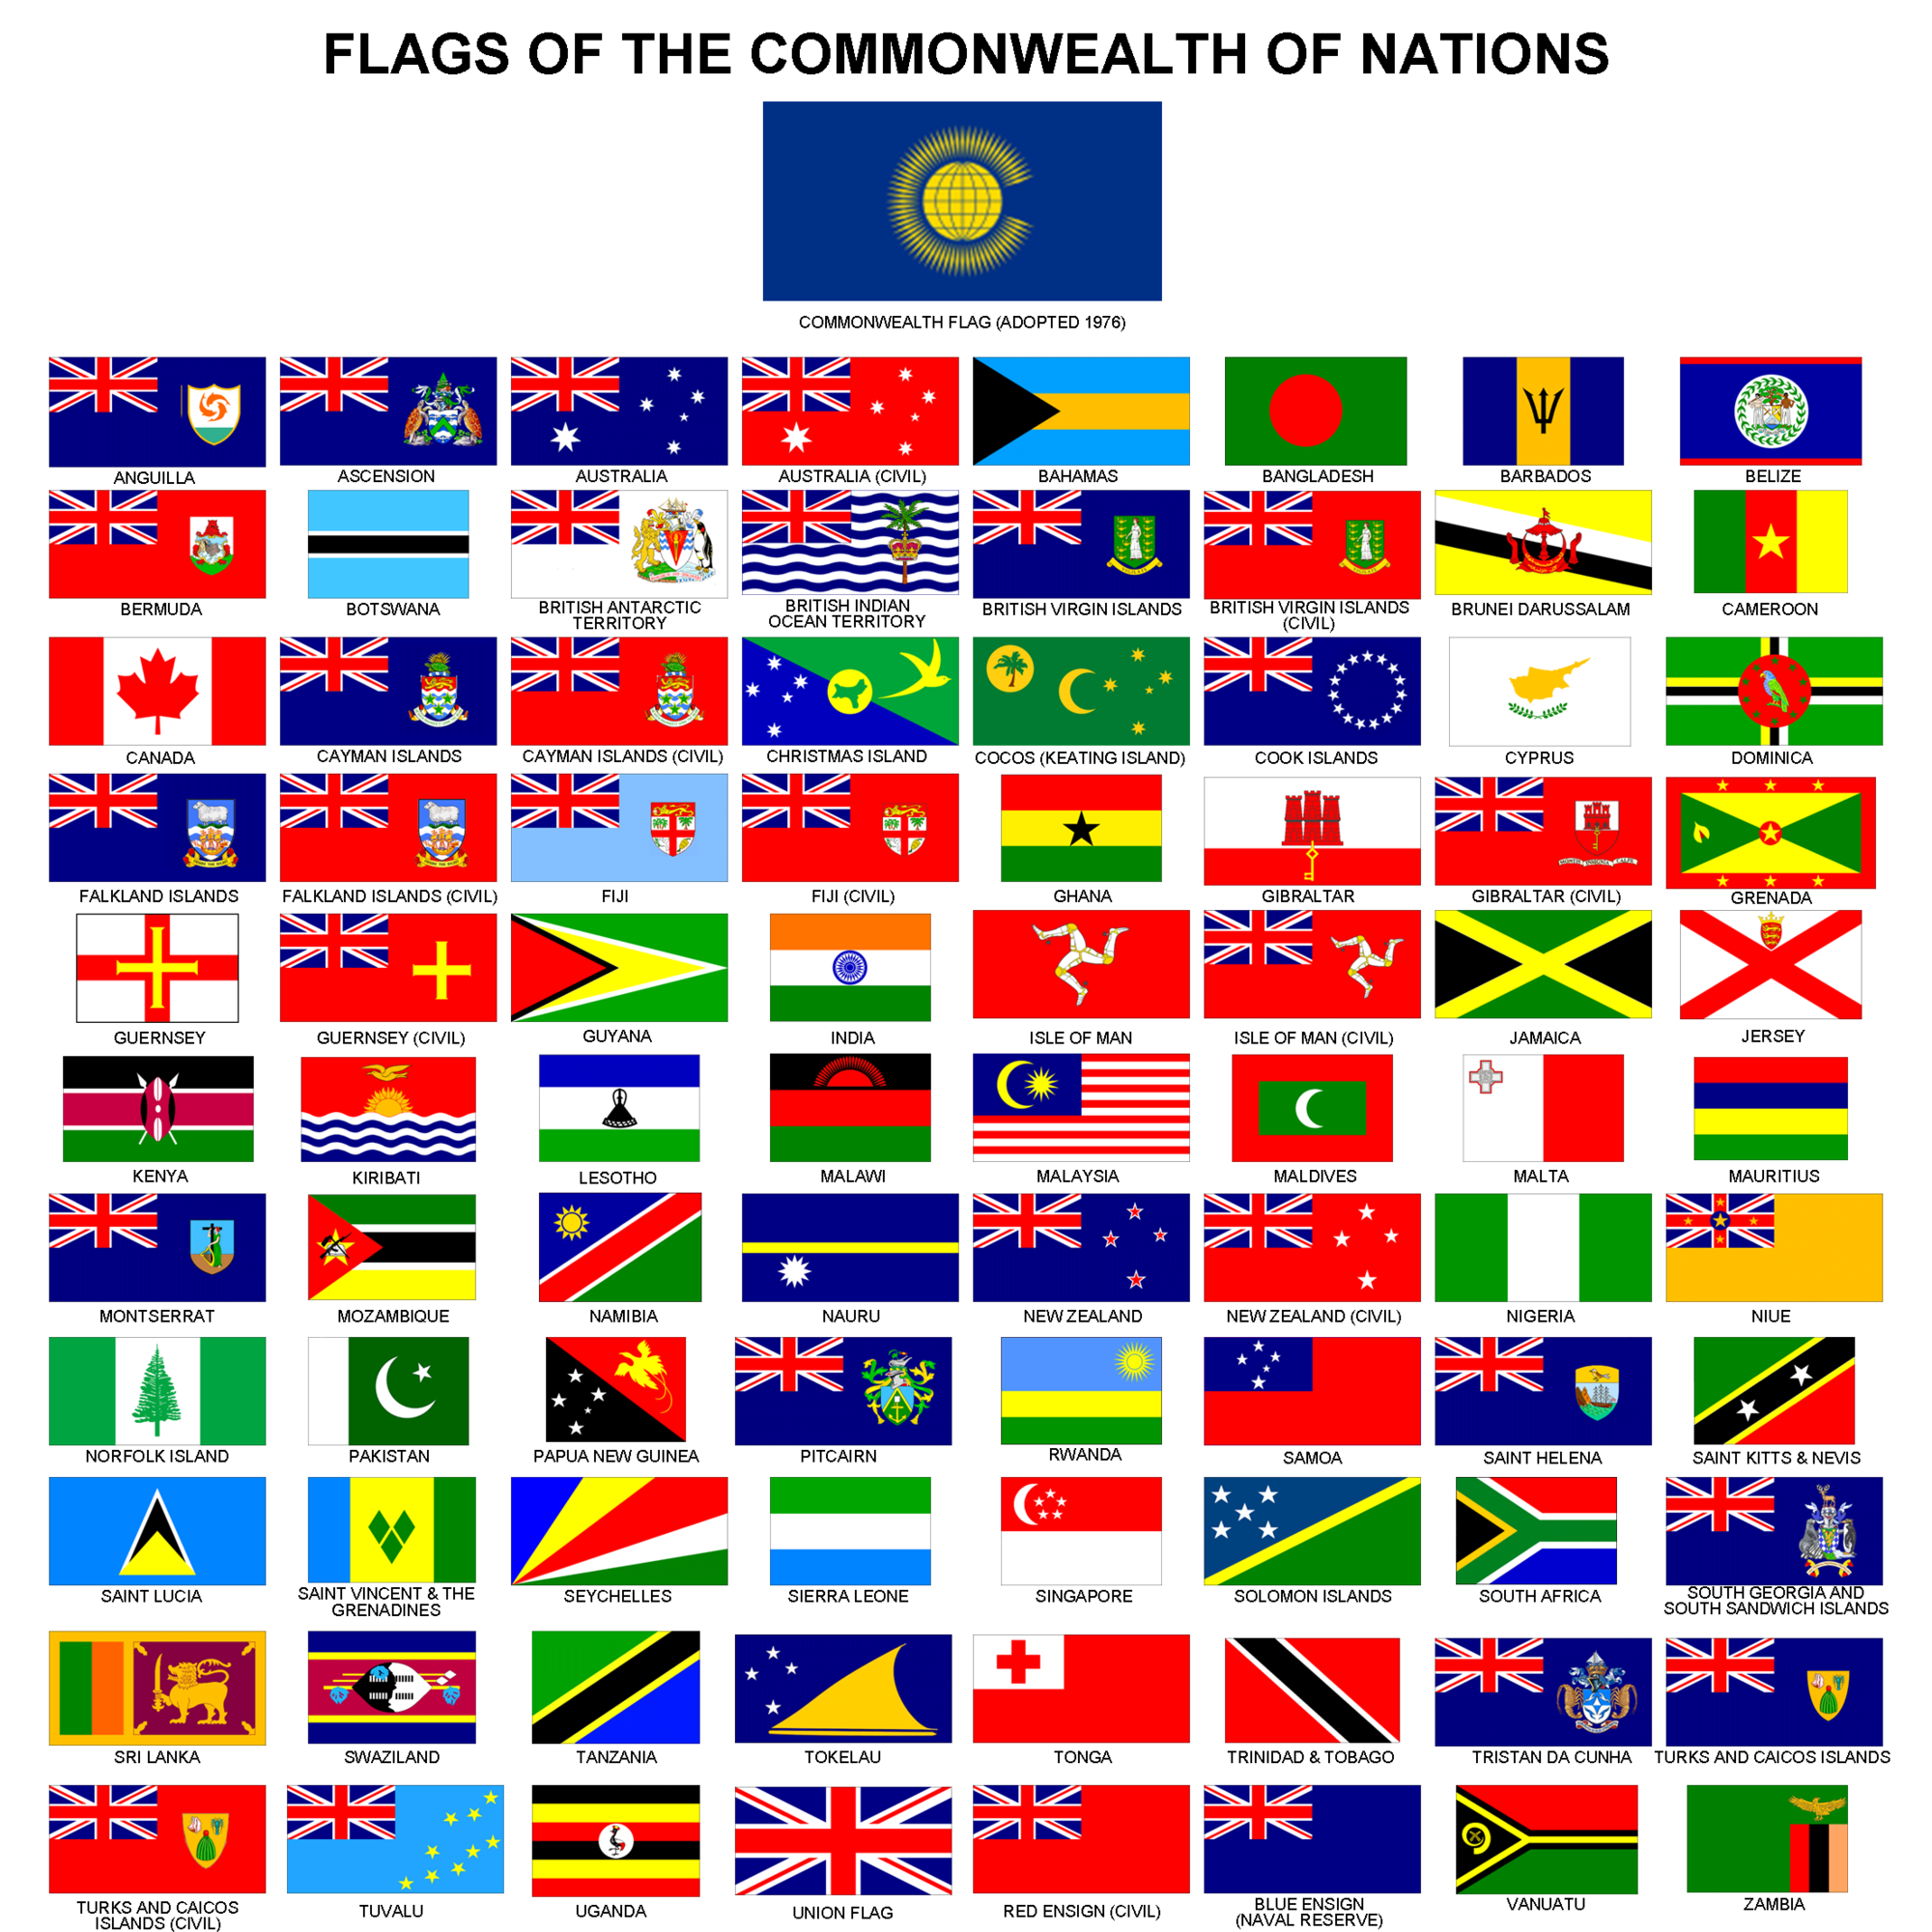 Flags_of_the_CON.png